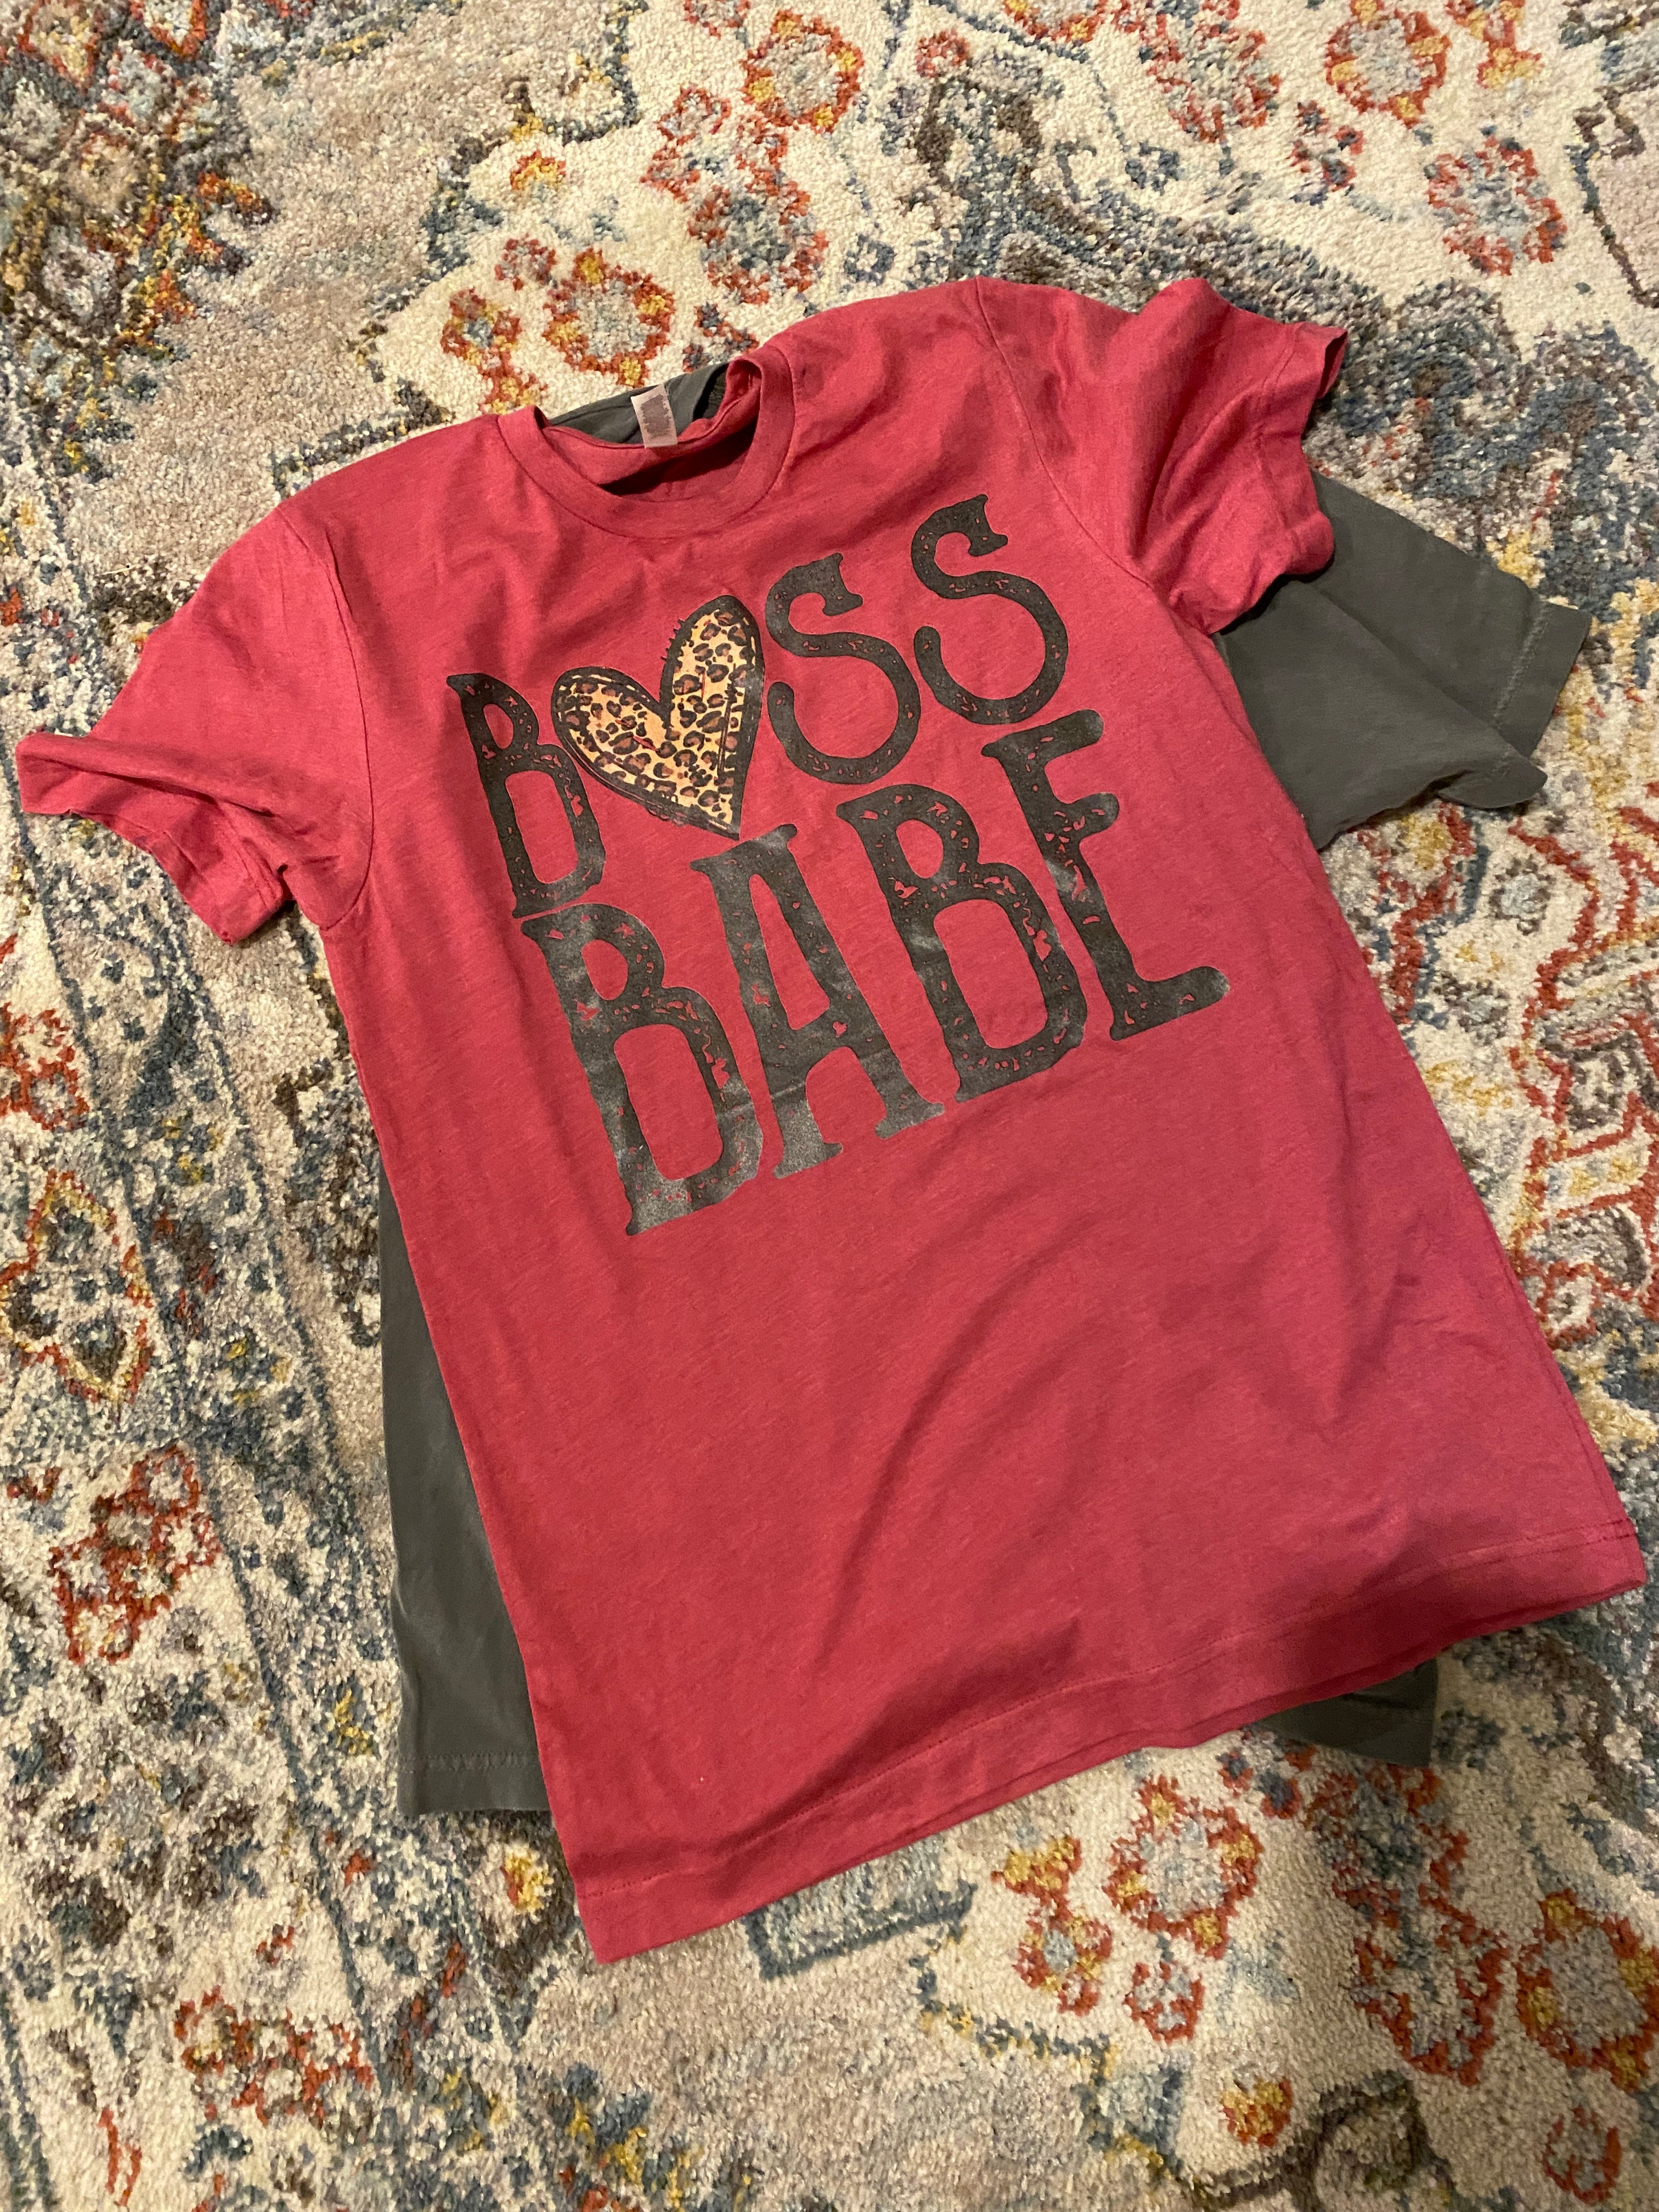 -Boss Babe Heart Tee-BOM-Boutique on Main -Badass, badass mama, everything, graphic tee, new arrivals